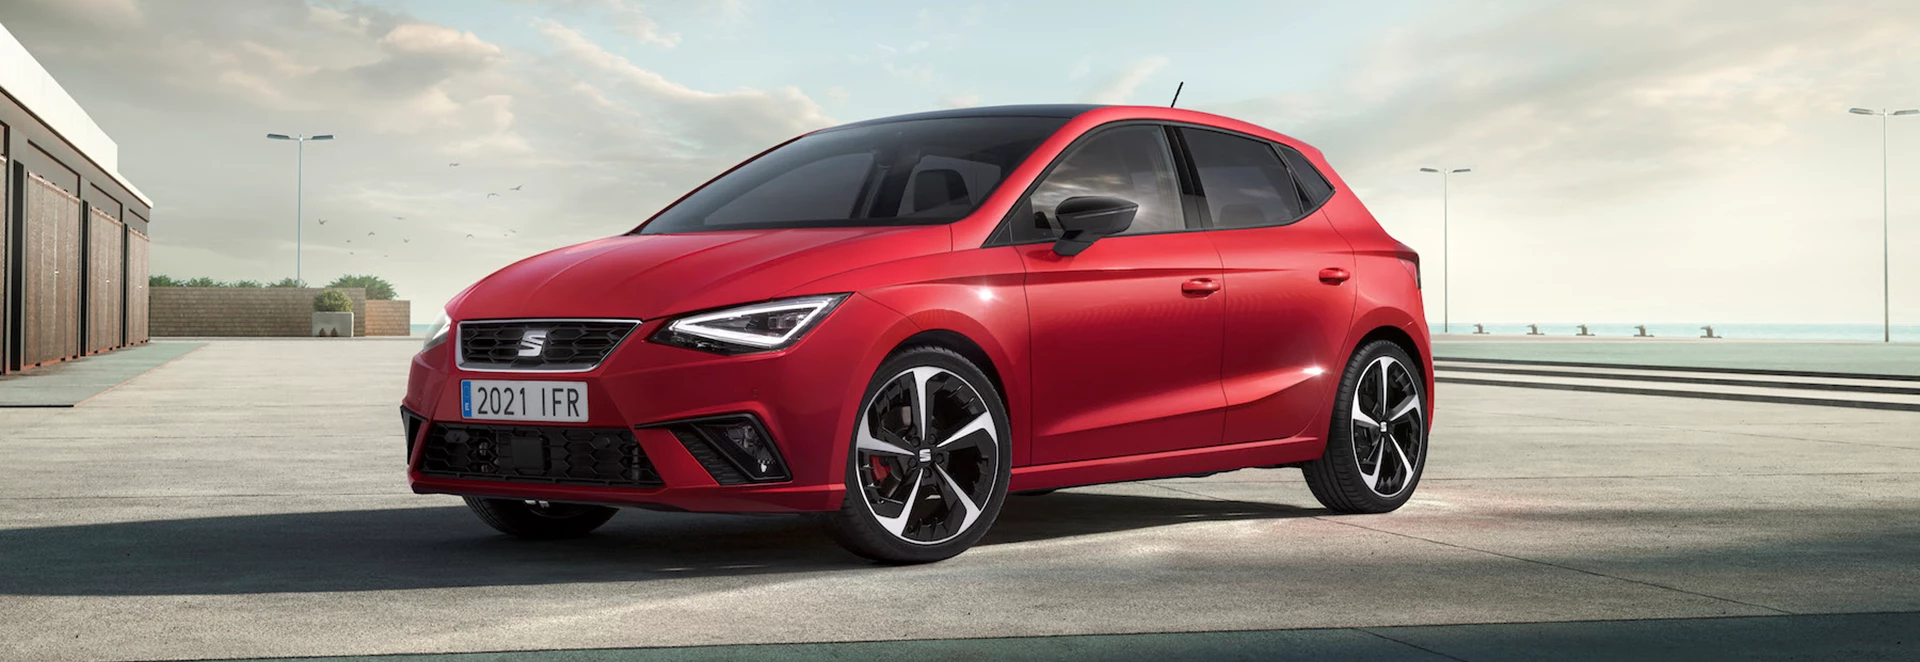 Buyer’s guide to the Seat Ibiza 